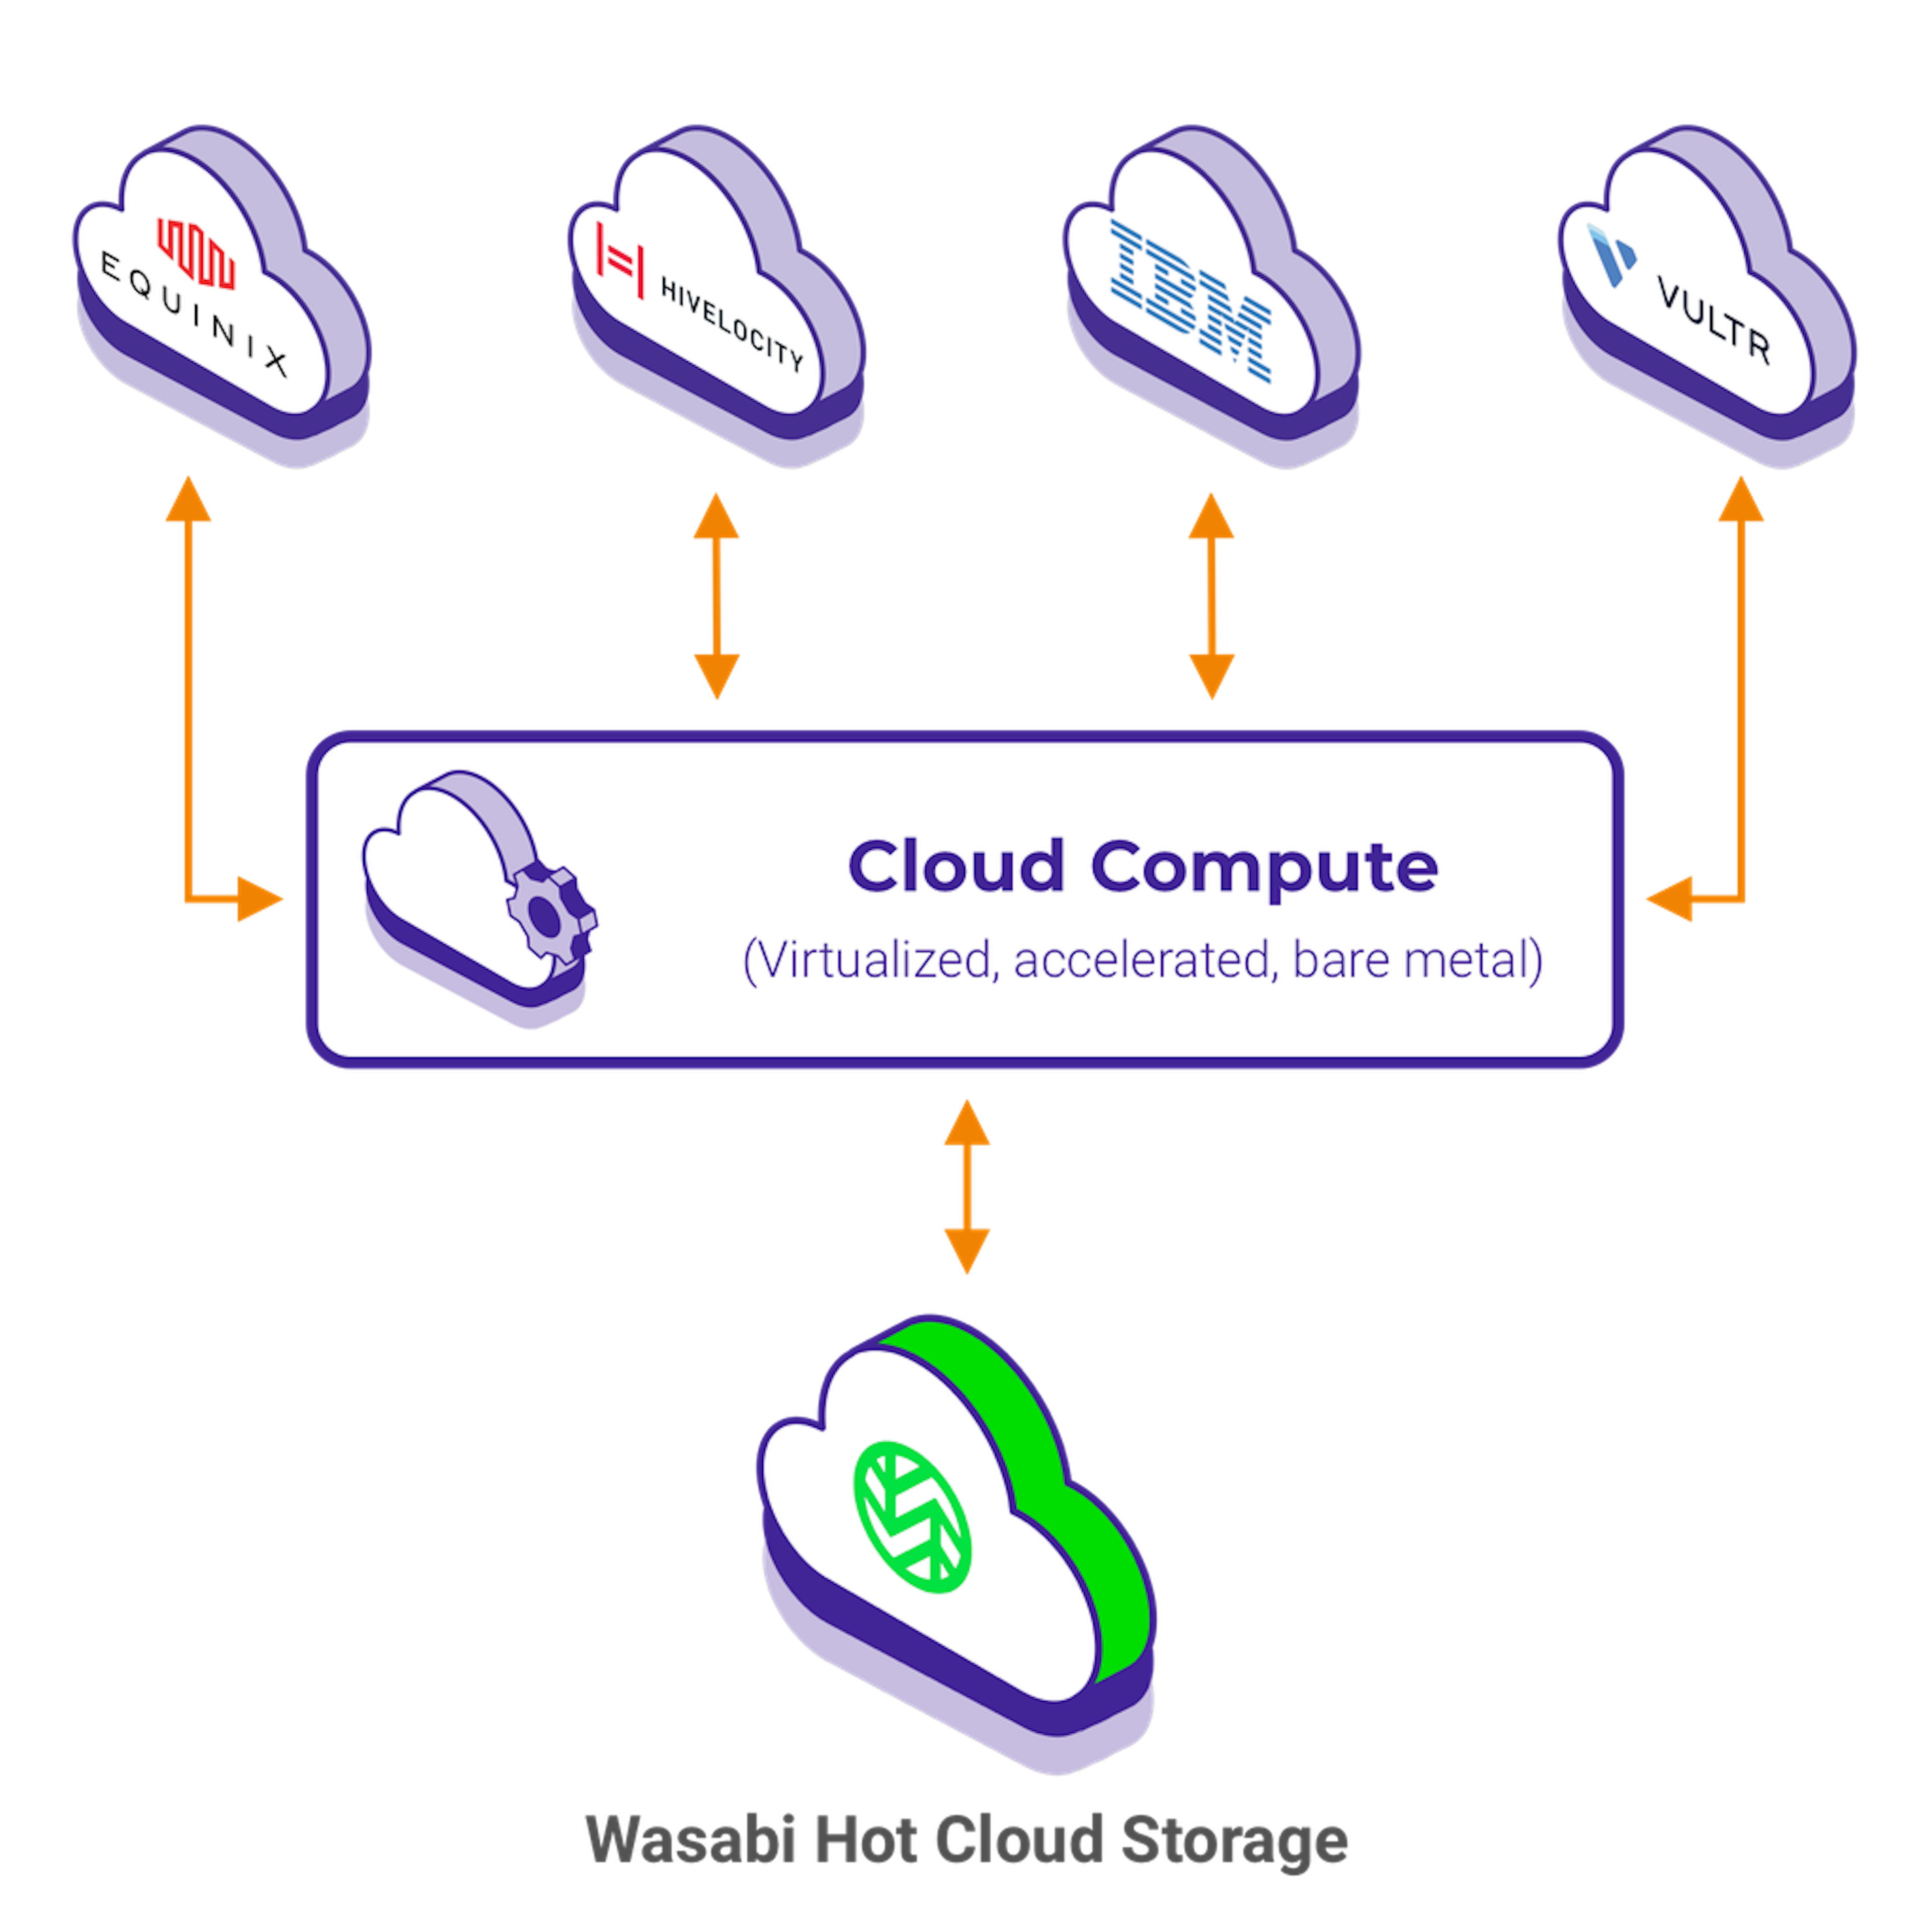 cloud compute diagram showing Equinix, Hivelocity, IBM, and Vultr connecting to Wasabi Hot Cloud Storage